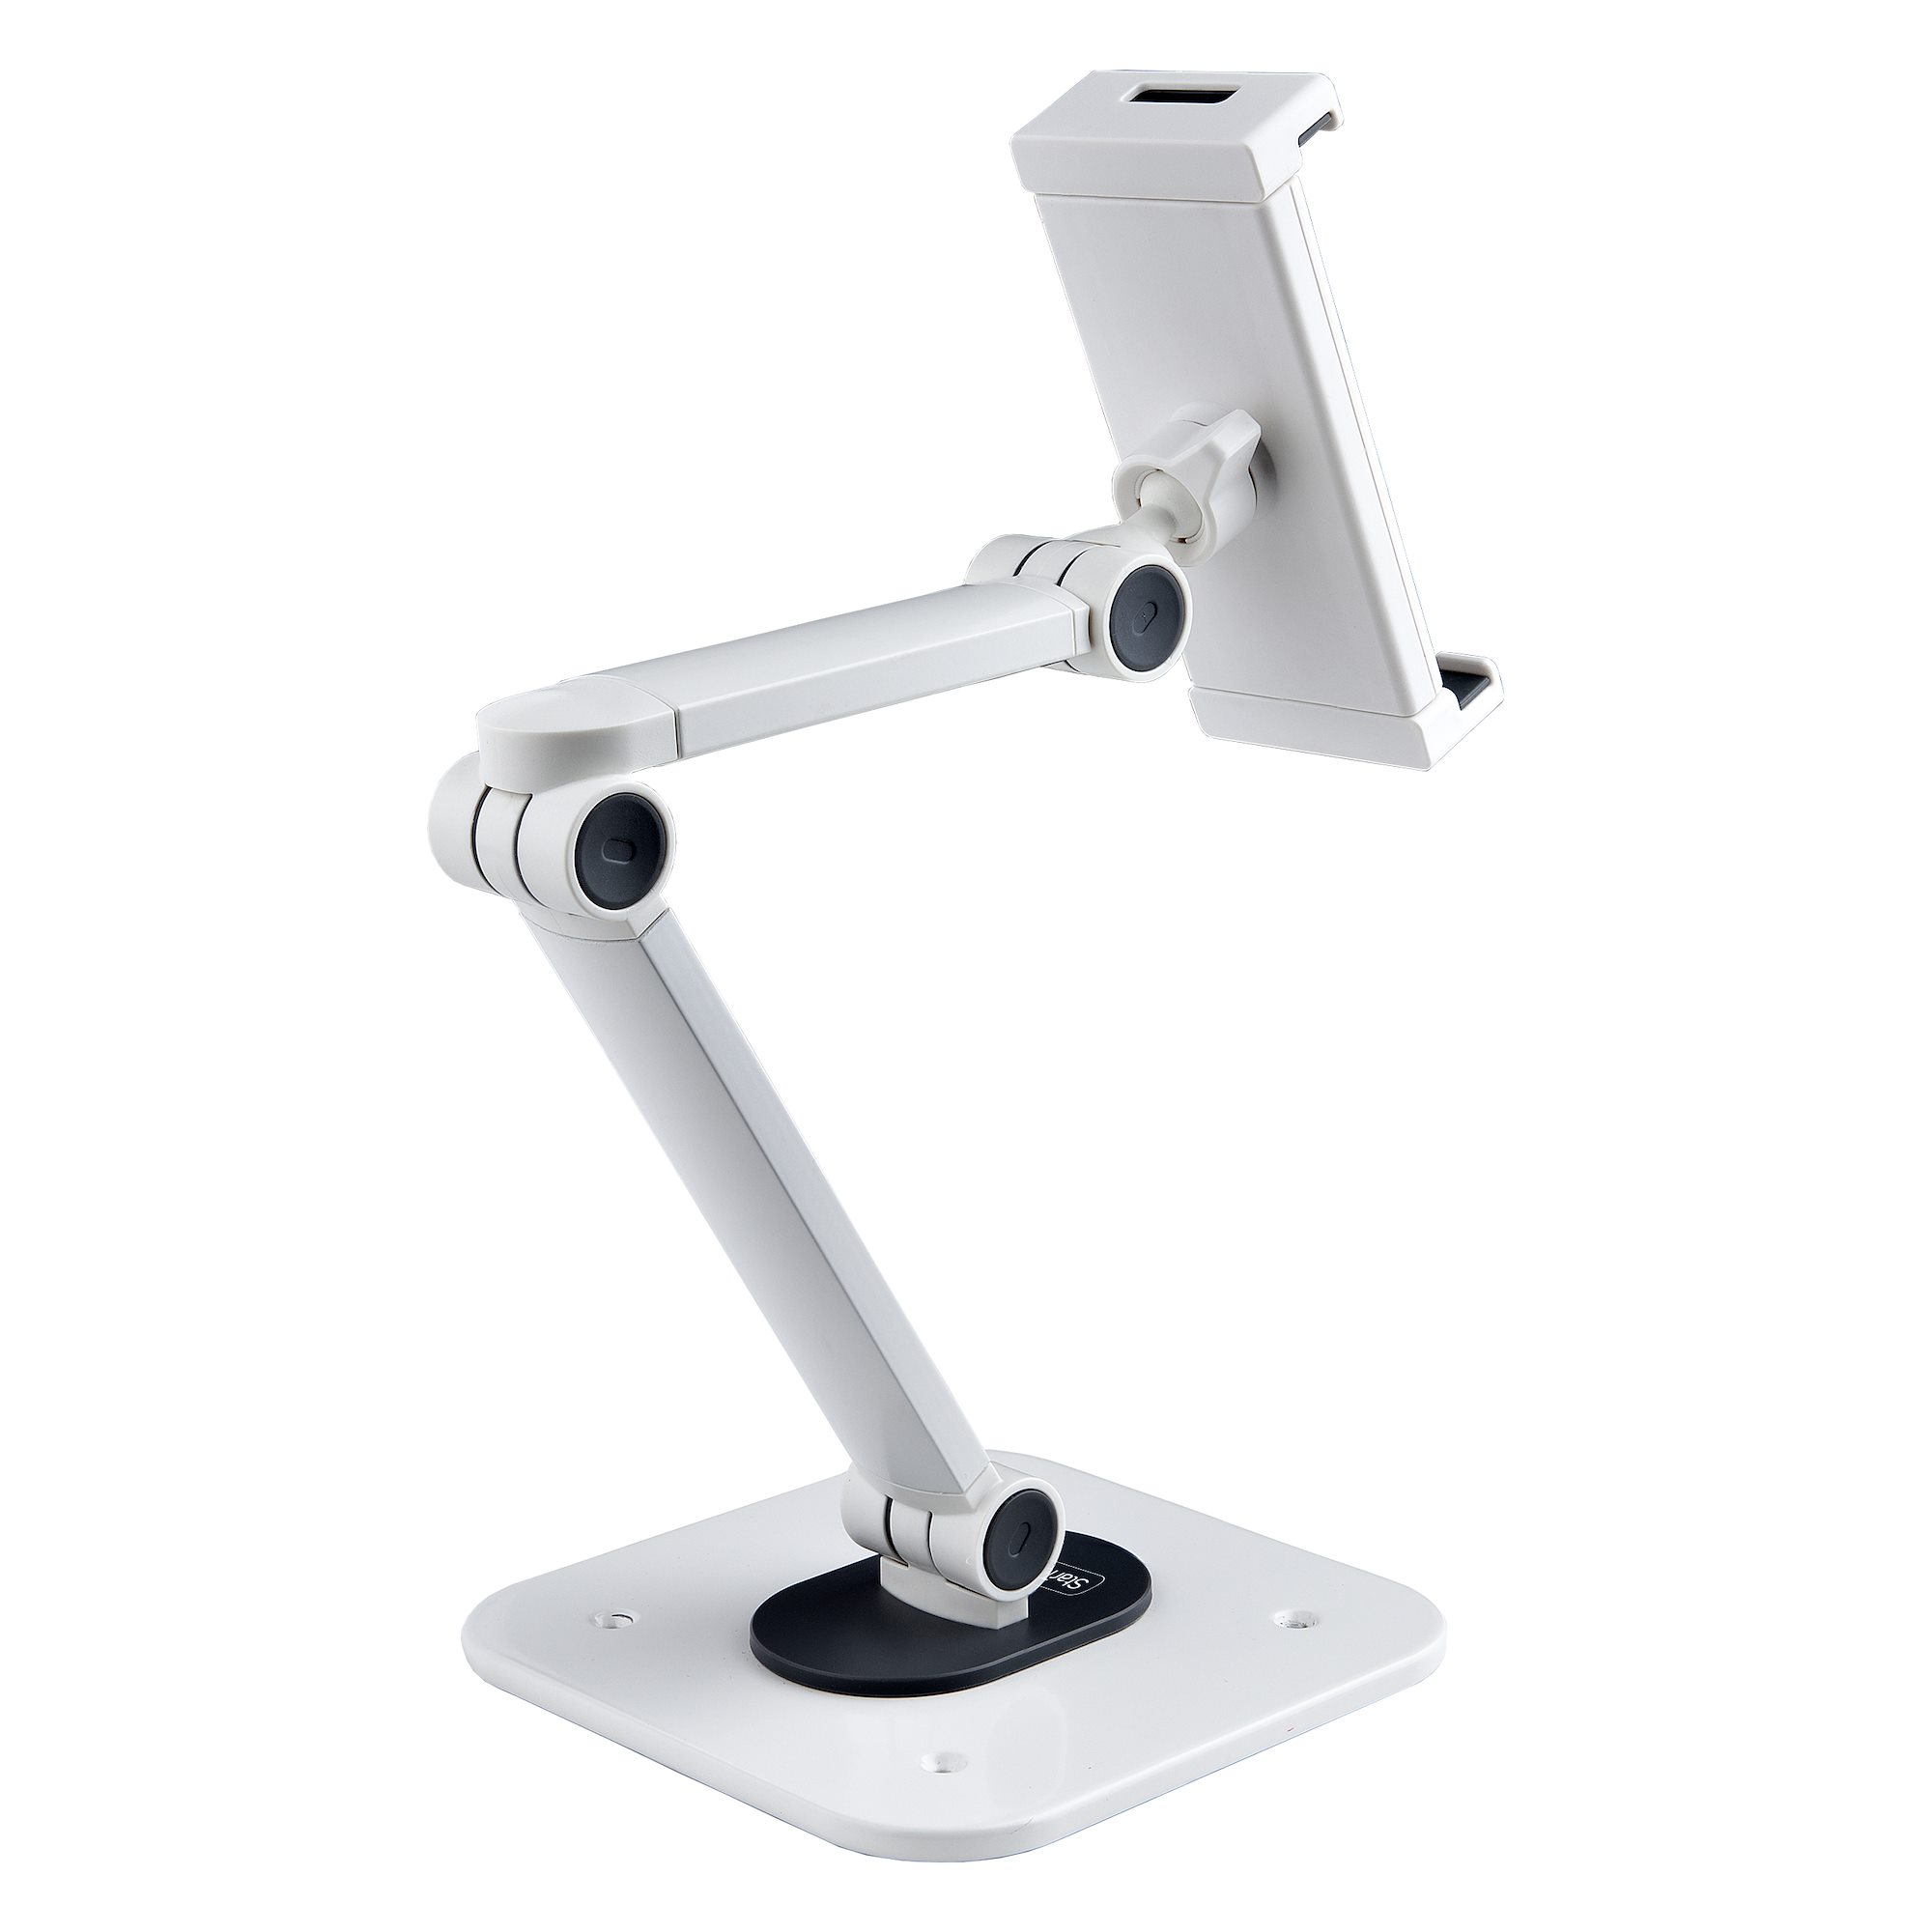 Desk-Mountable Tablet Stand with Articulating Arm for iPad or Android